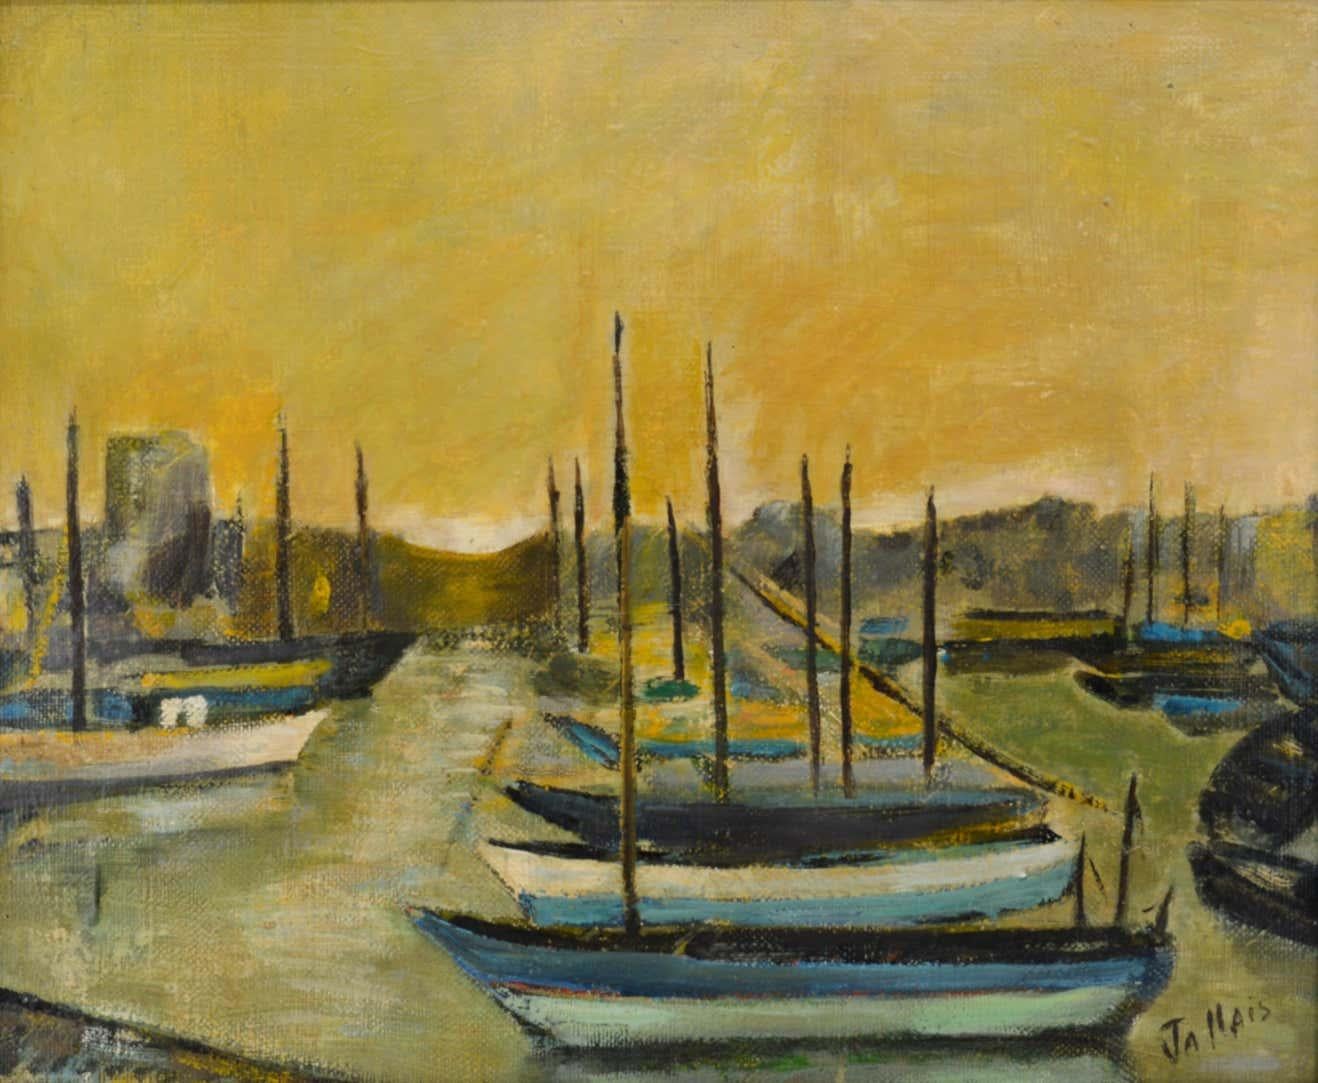 Oil on Canvas by Jallais, Boats in Port, 1960s For Sale 1